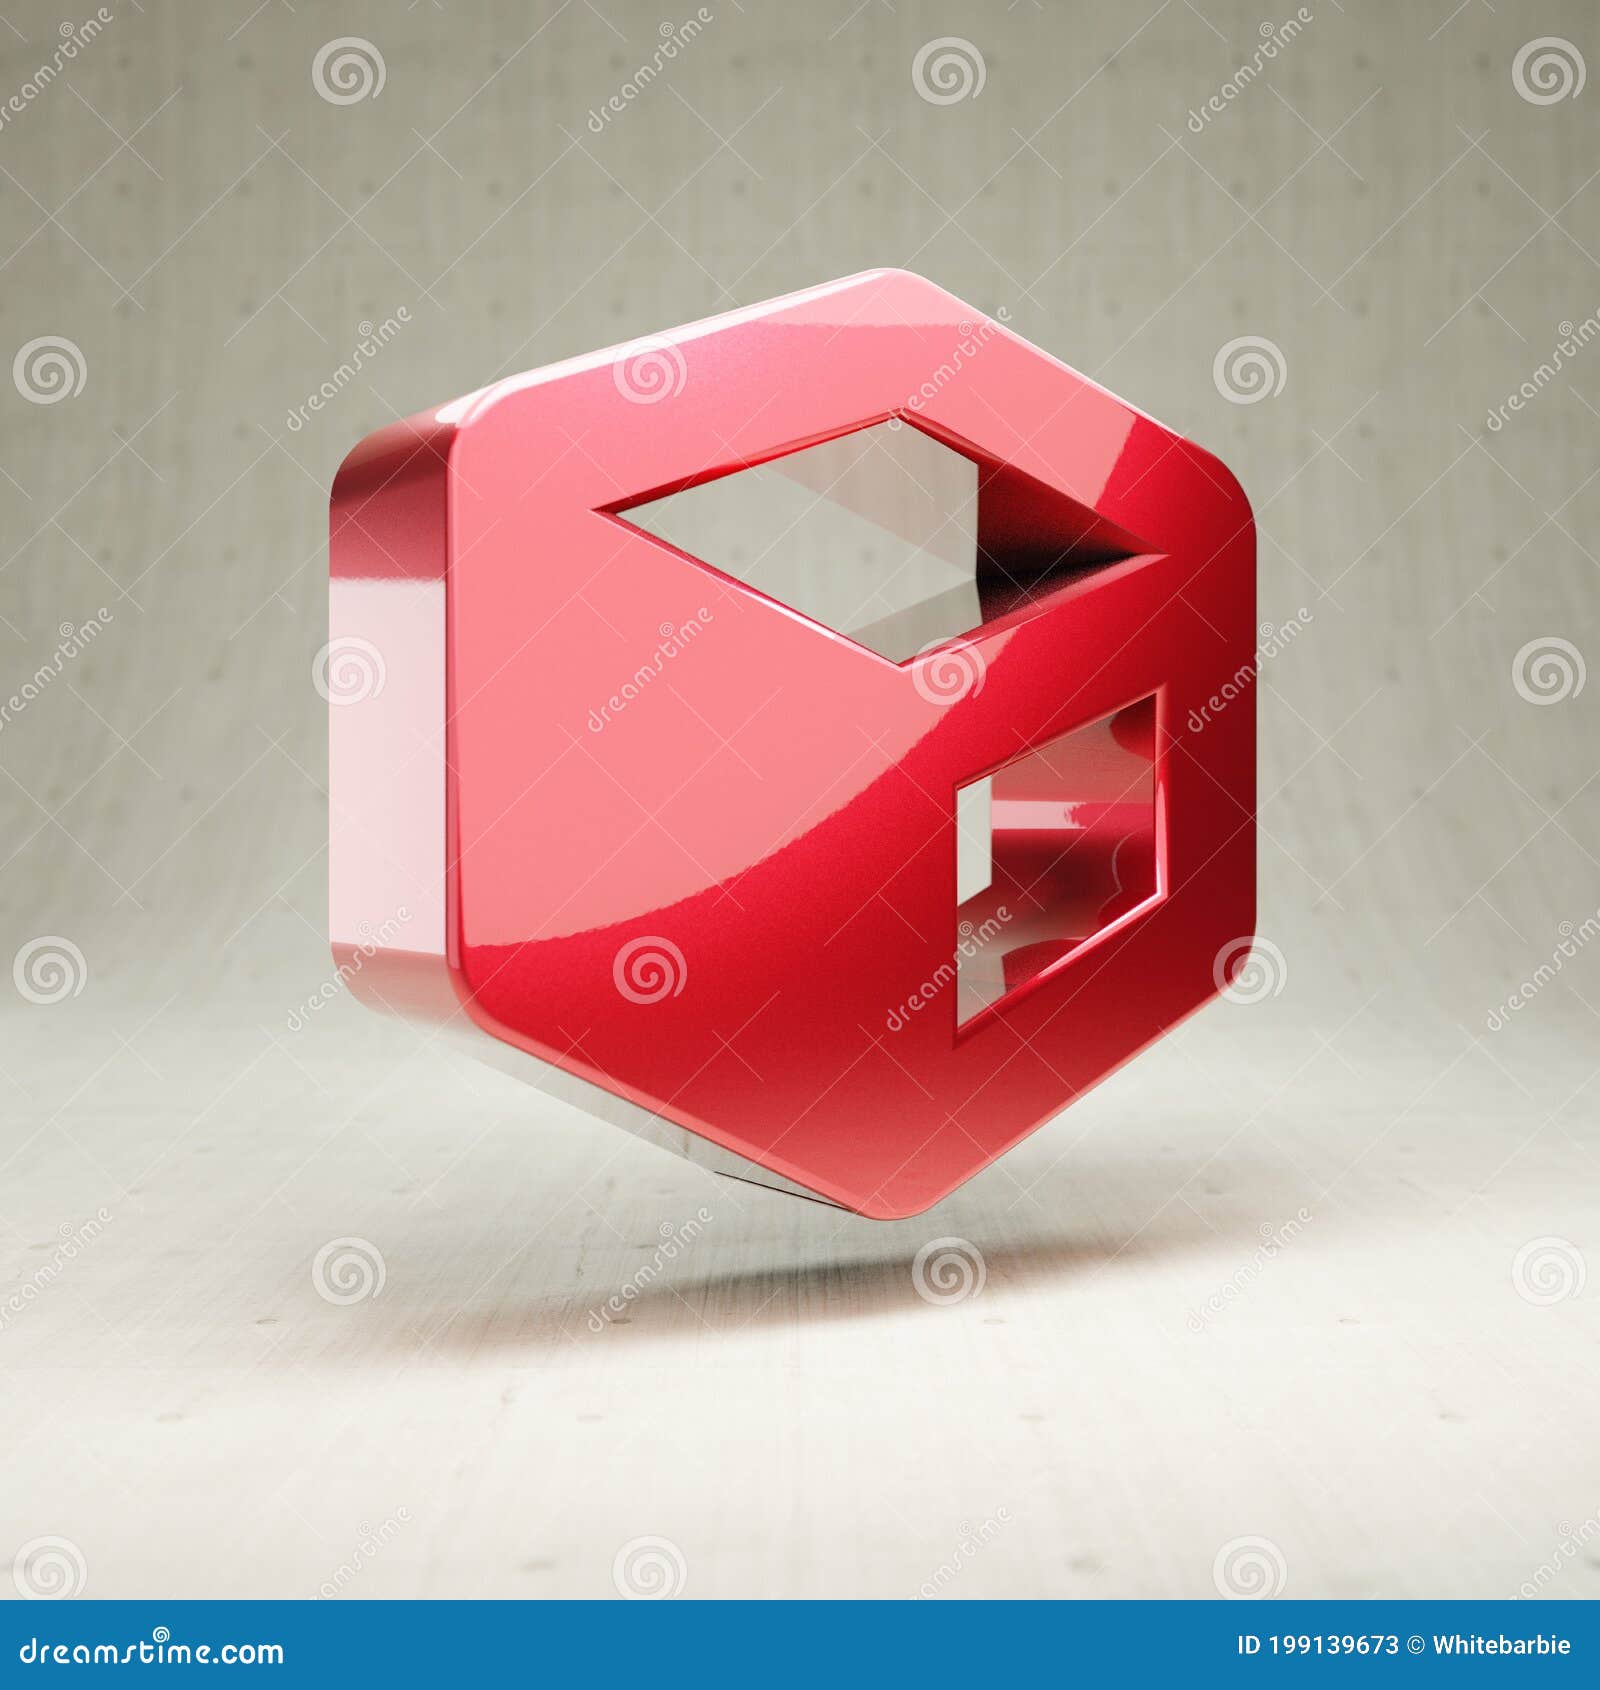 Cube Icon. Red Glossy Metallic Cube Symbol Isolated on White Concrete ...